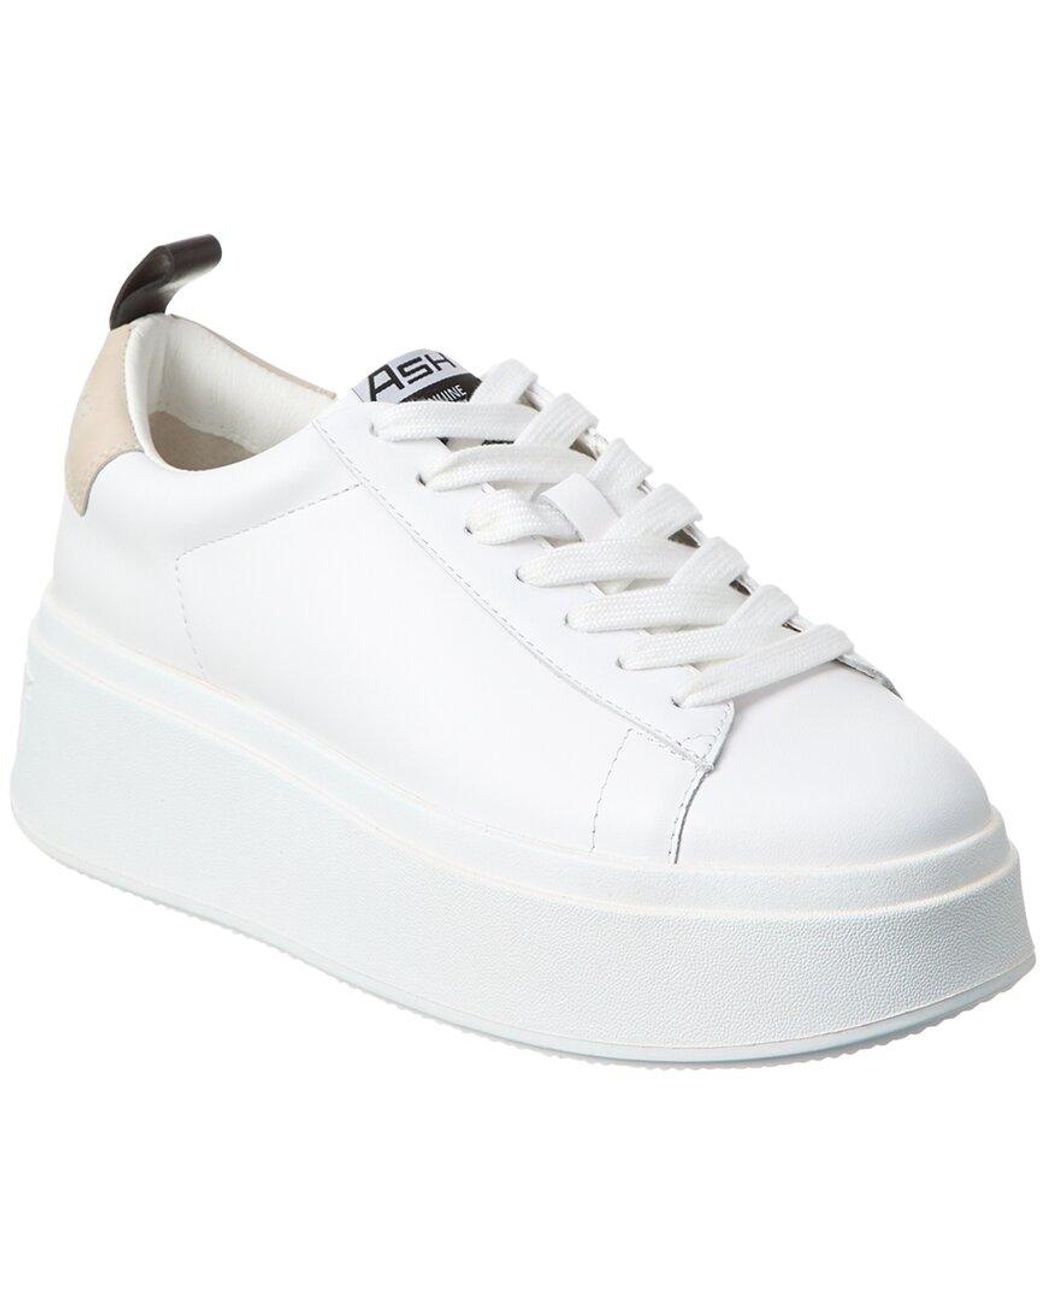 Ash Move Leather Platform Sneaker in White | Lyst